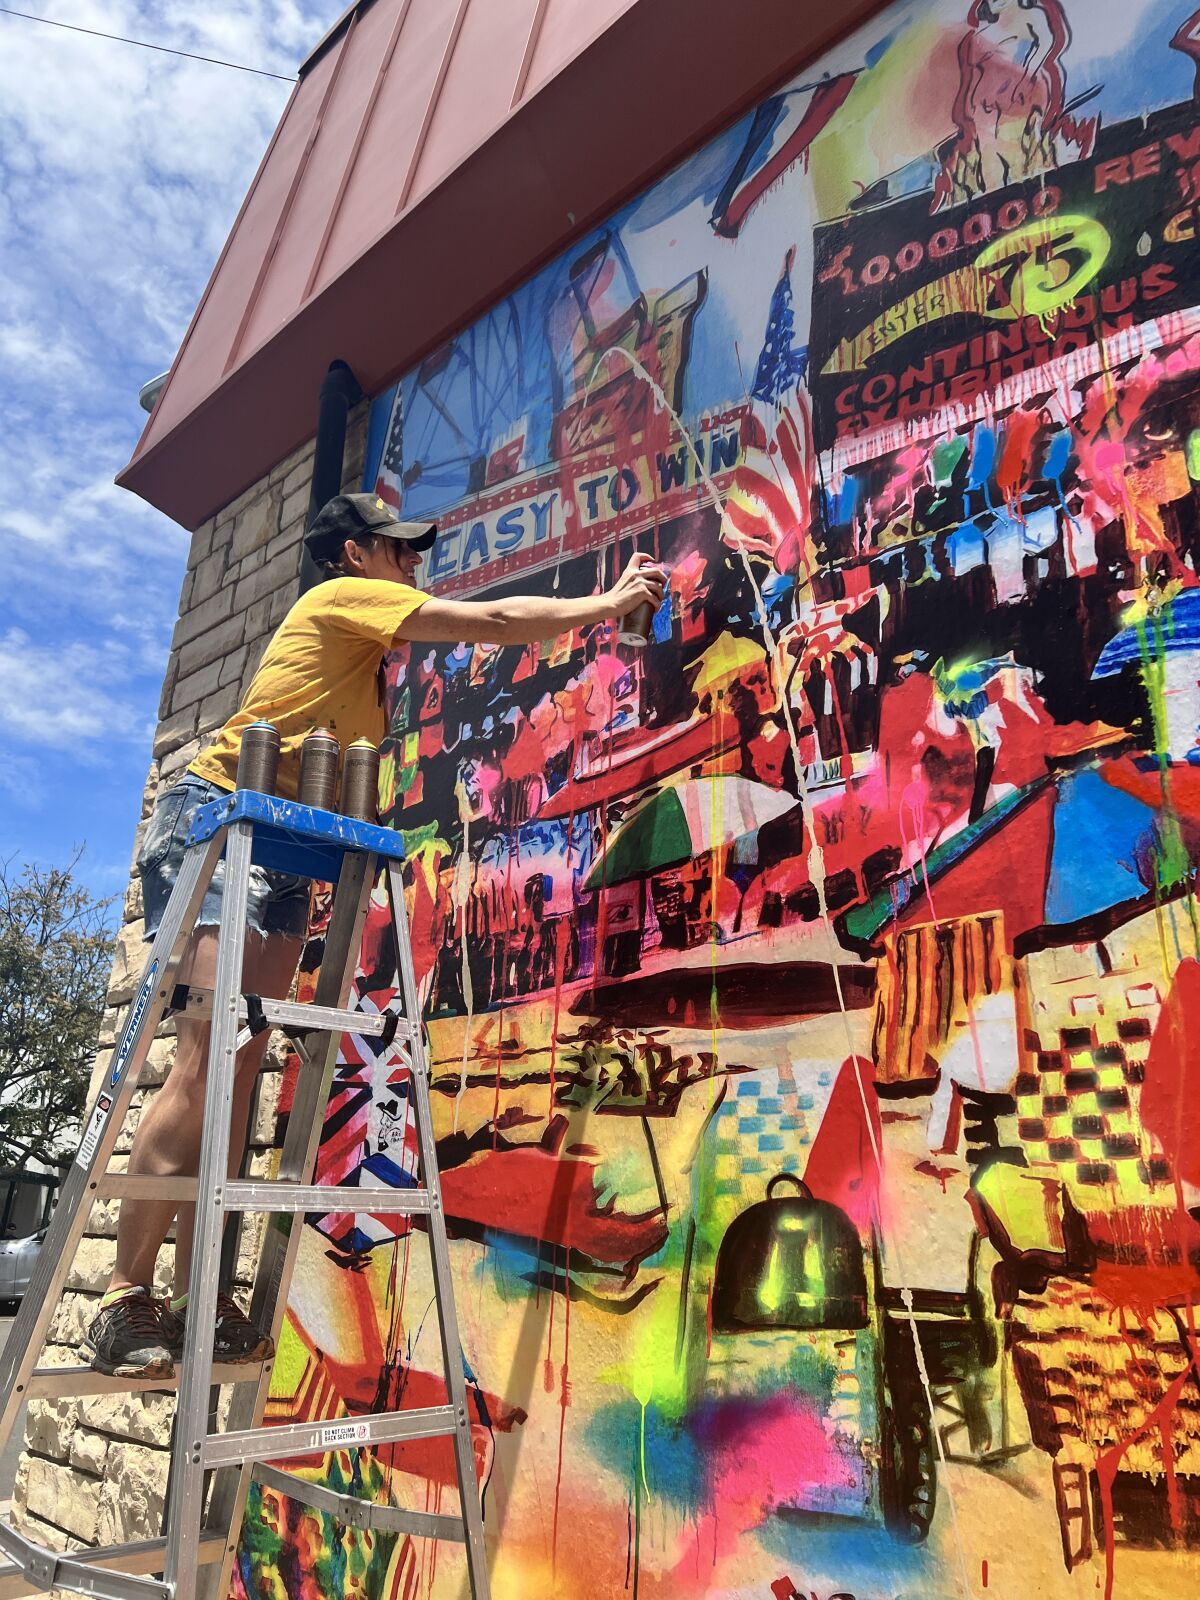 Artist Rosson Crow returned to her mural “Ocean Front Property in Arizona” on May 14 to add spray-painted and enamel colors.